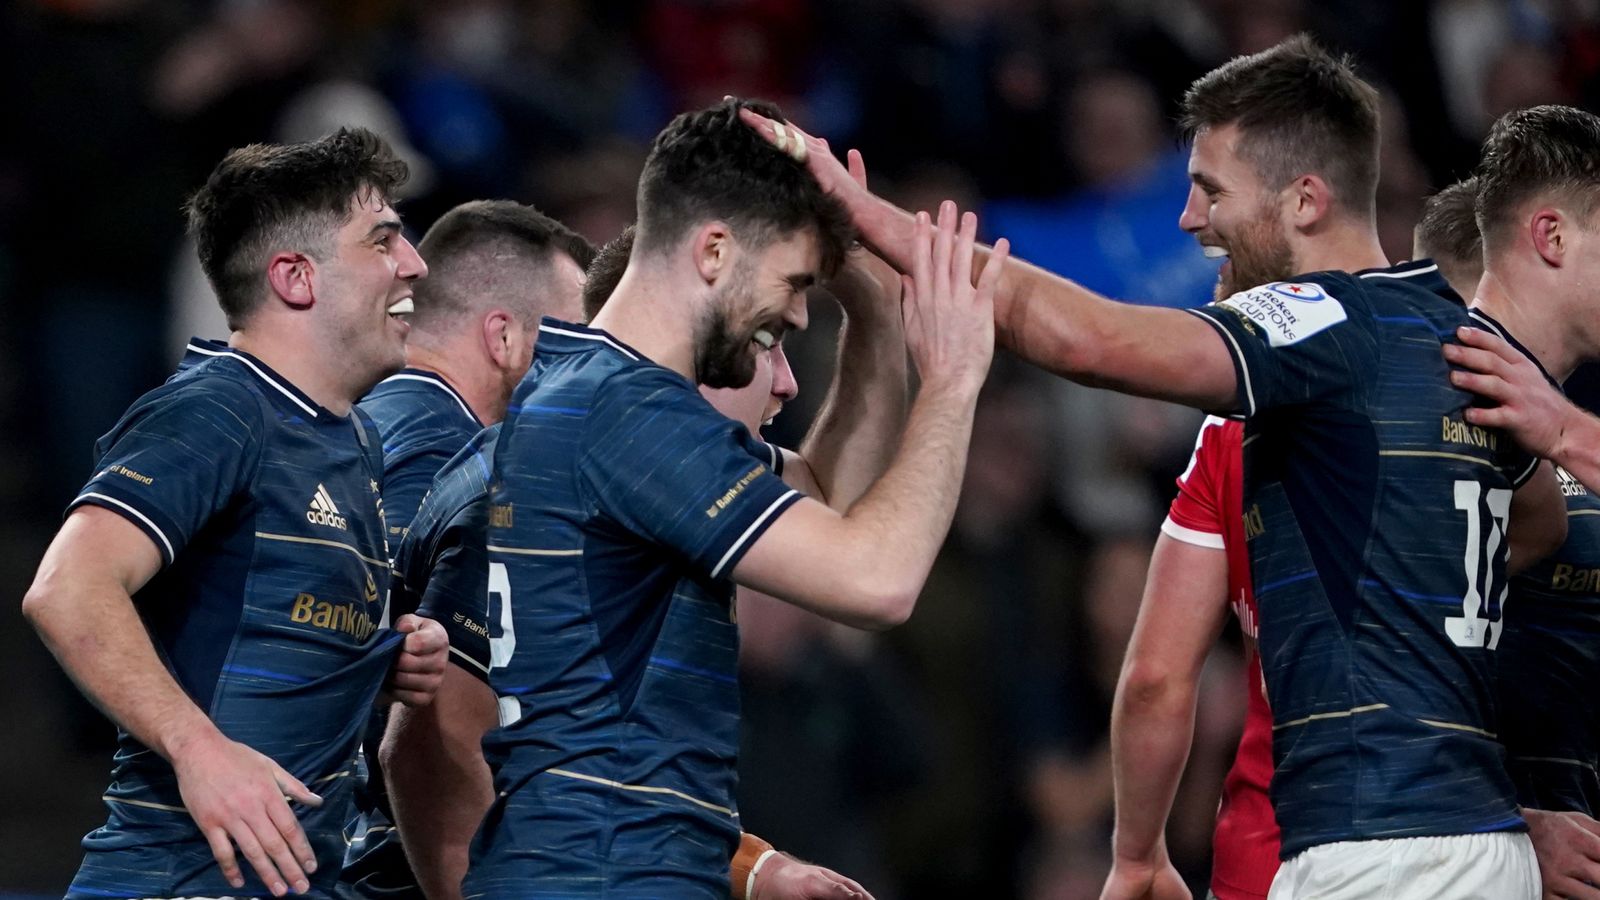 Champions Cup: Leinster sweep aside Leicester Tigers to reach semi-finals as Garry Ringrose scores twice